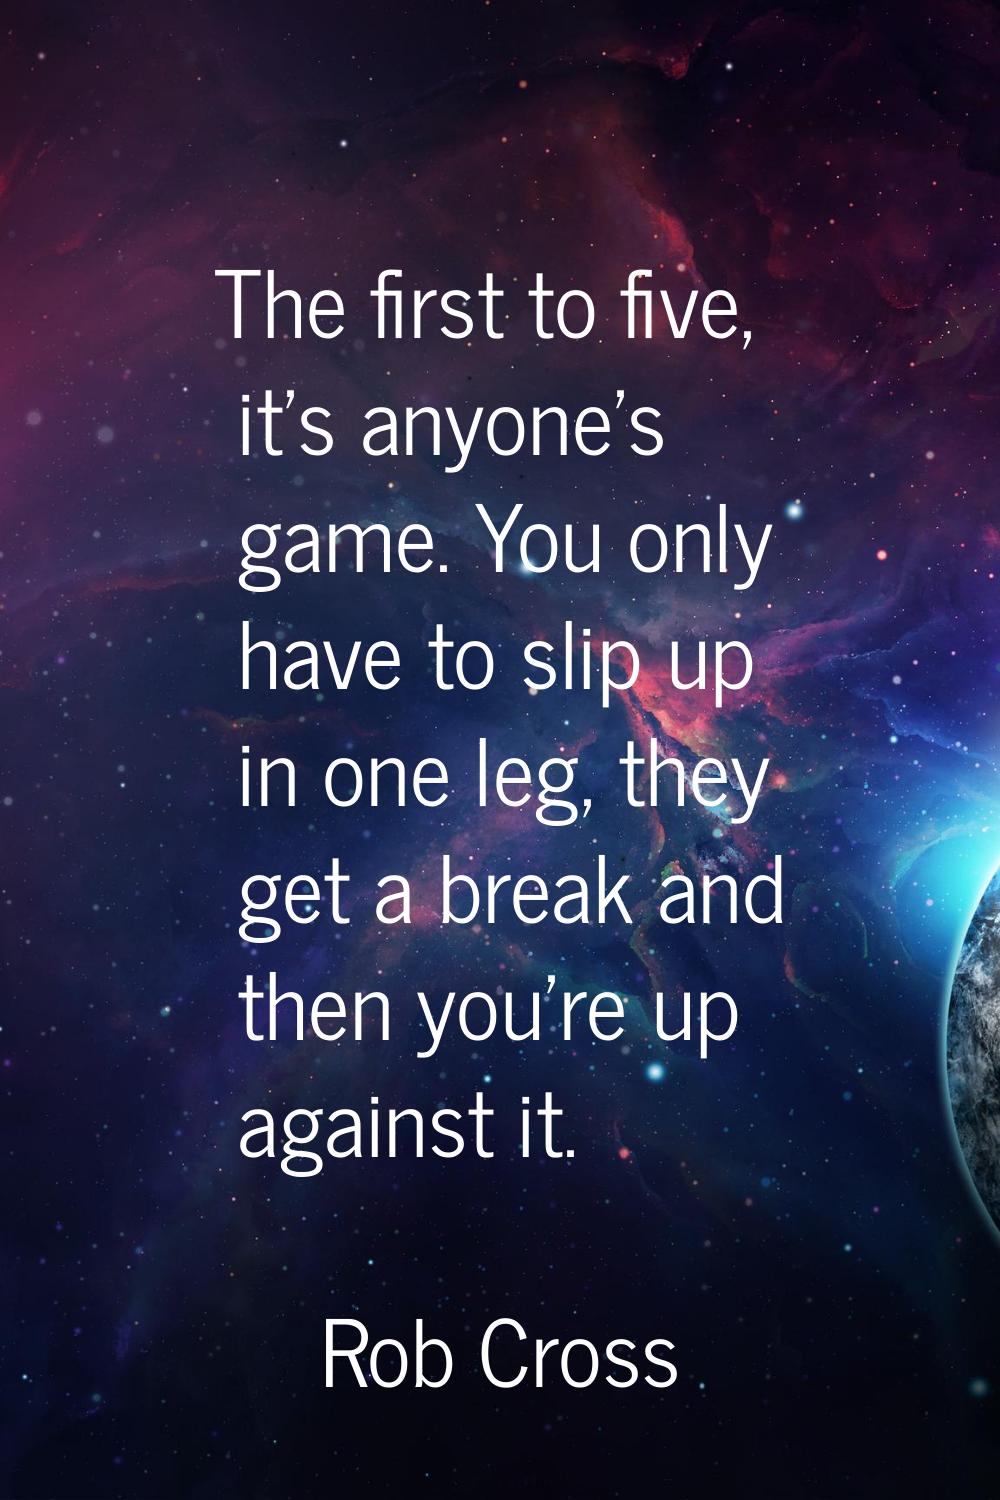 The first to five, it's anyone's game. You only have to slip up in one leg, they get a break and th